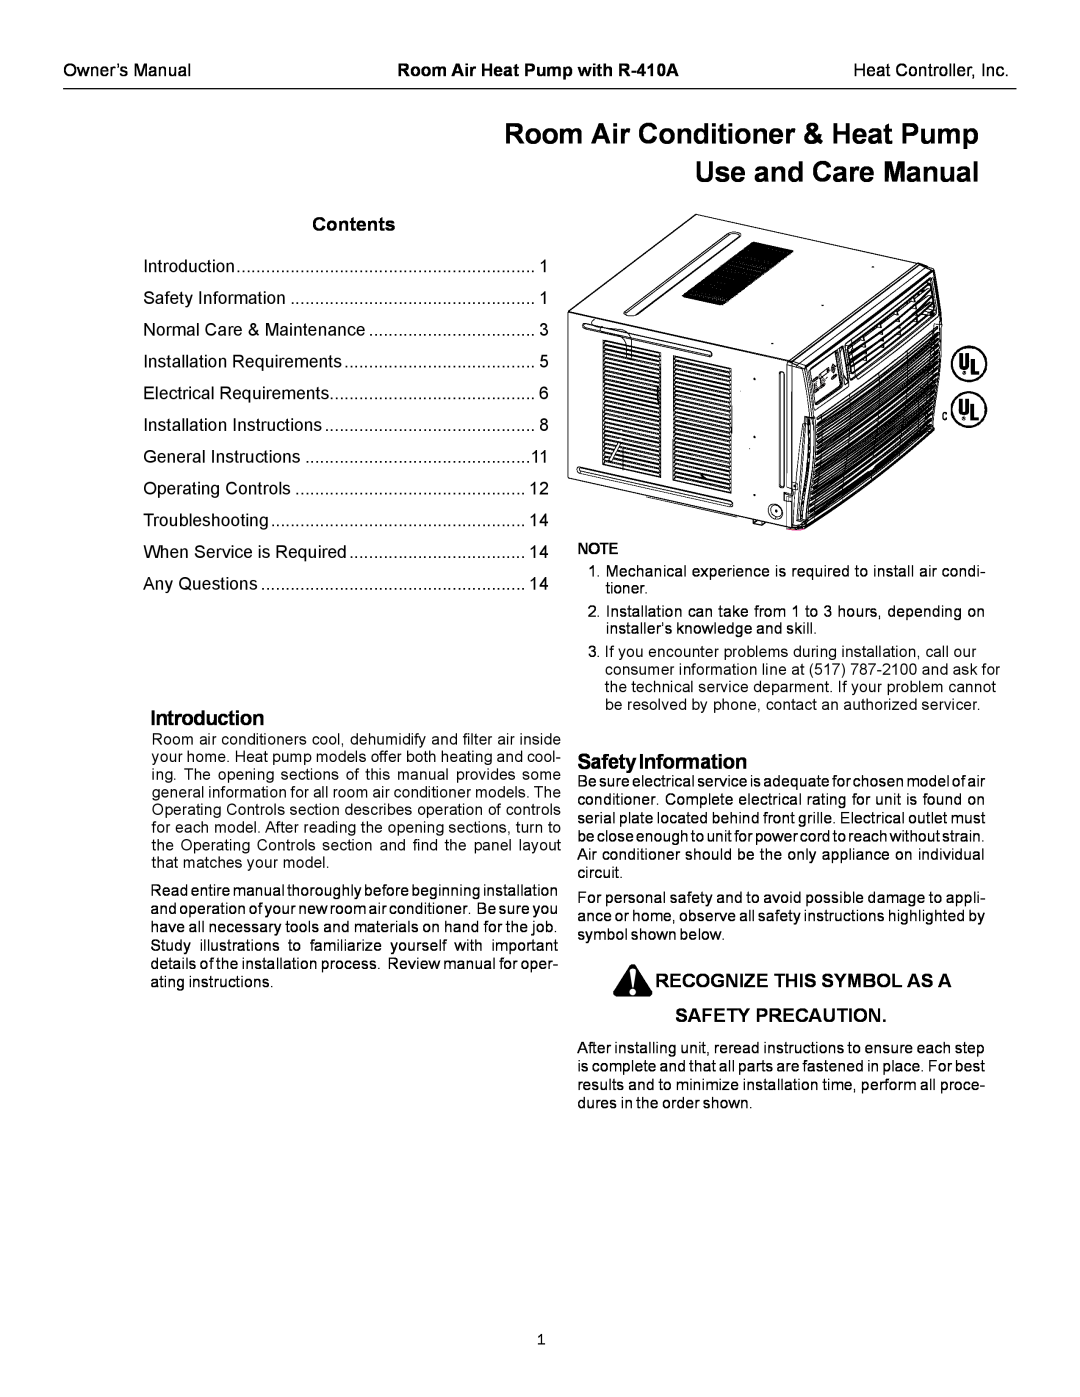 Heat Controller RAH-123G Introduction, SafetyInformation, Contents, Recognize This Symbol As A Safety Precaution 